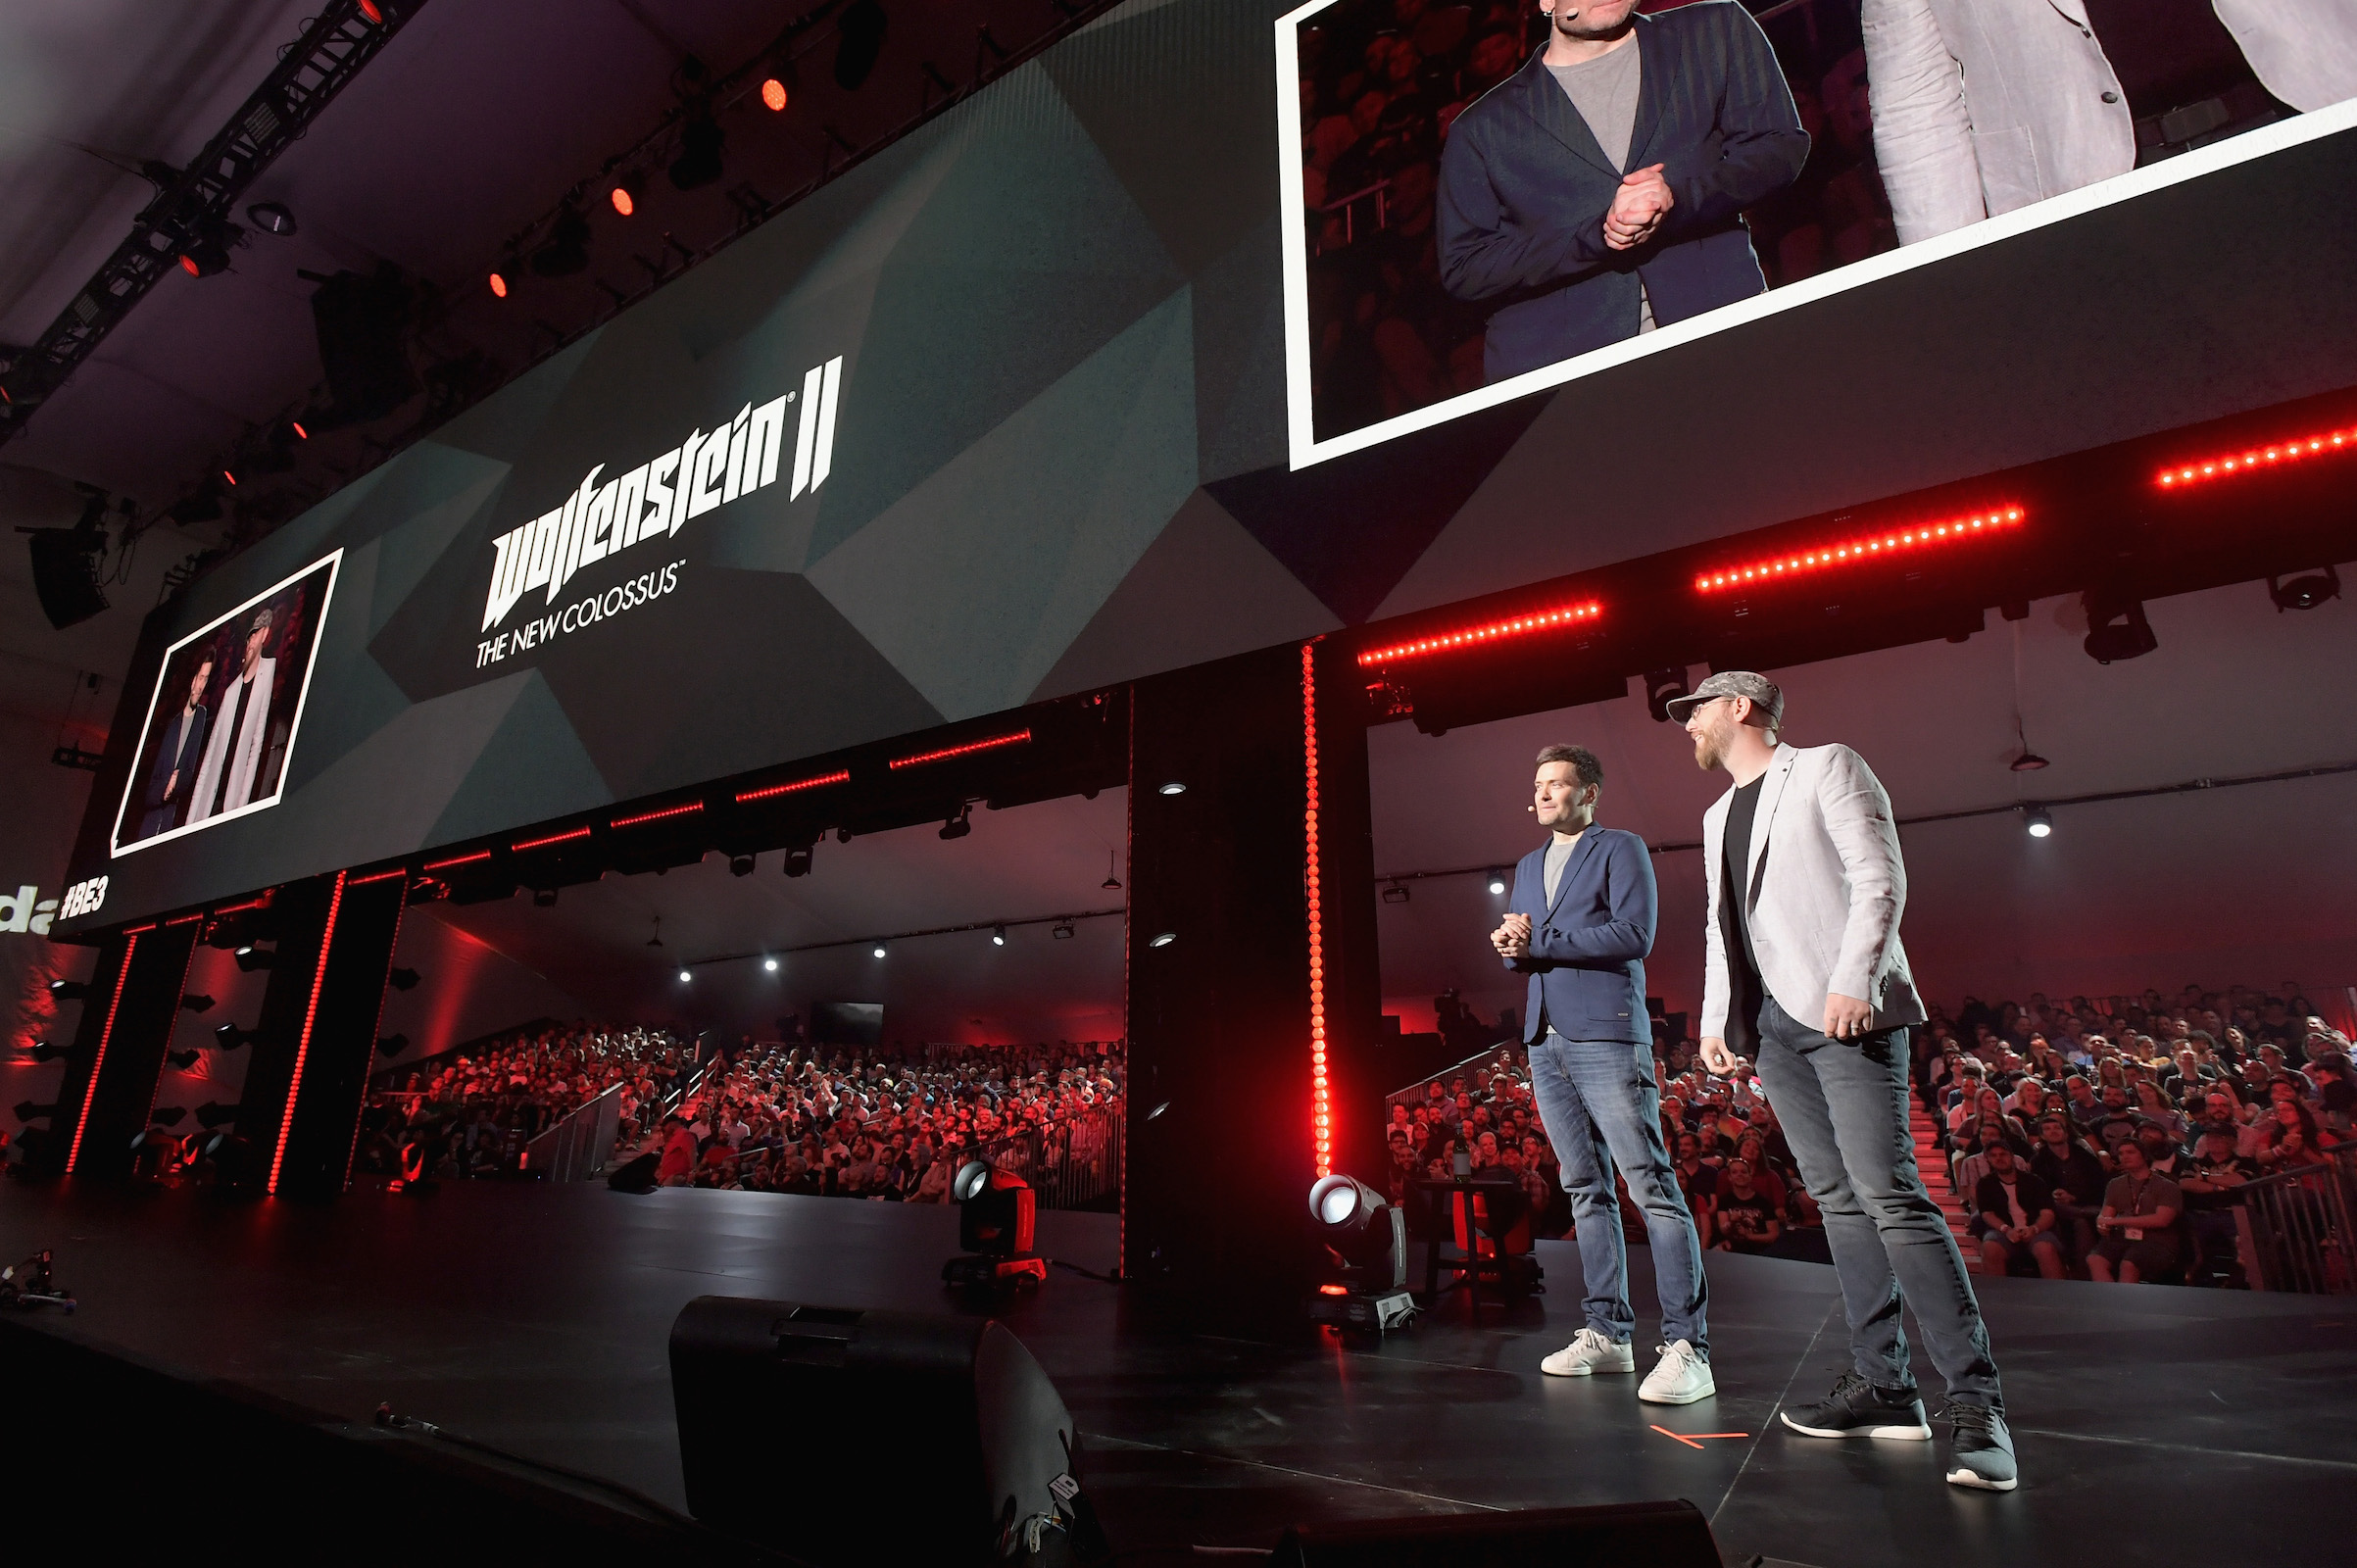 Jerk Gustafsson (L) and Jens Matthies of MachineGames present 'Wolfenstein II' onstage as Bethesda Softworks shows off new video game experiences at its E3 Showcase and at The Event Deck at LA LIVE on June 10, 2018, ahead of the Electronic Entertainment Expo (E3)  in Los Angeles. (Charley Gallay—Getty Images for Bethesda Softworks)